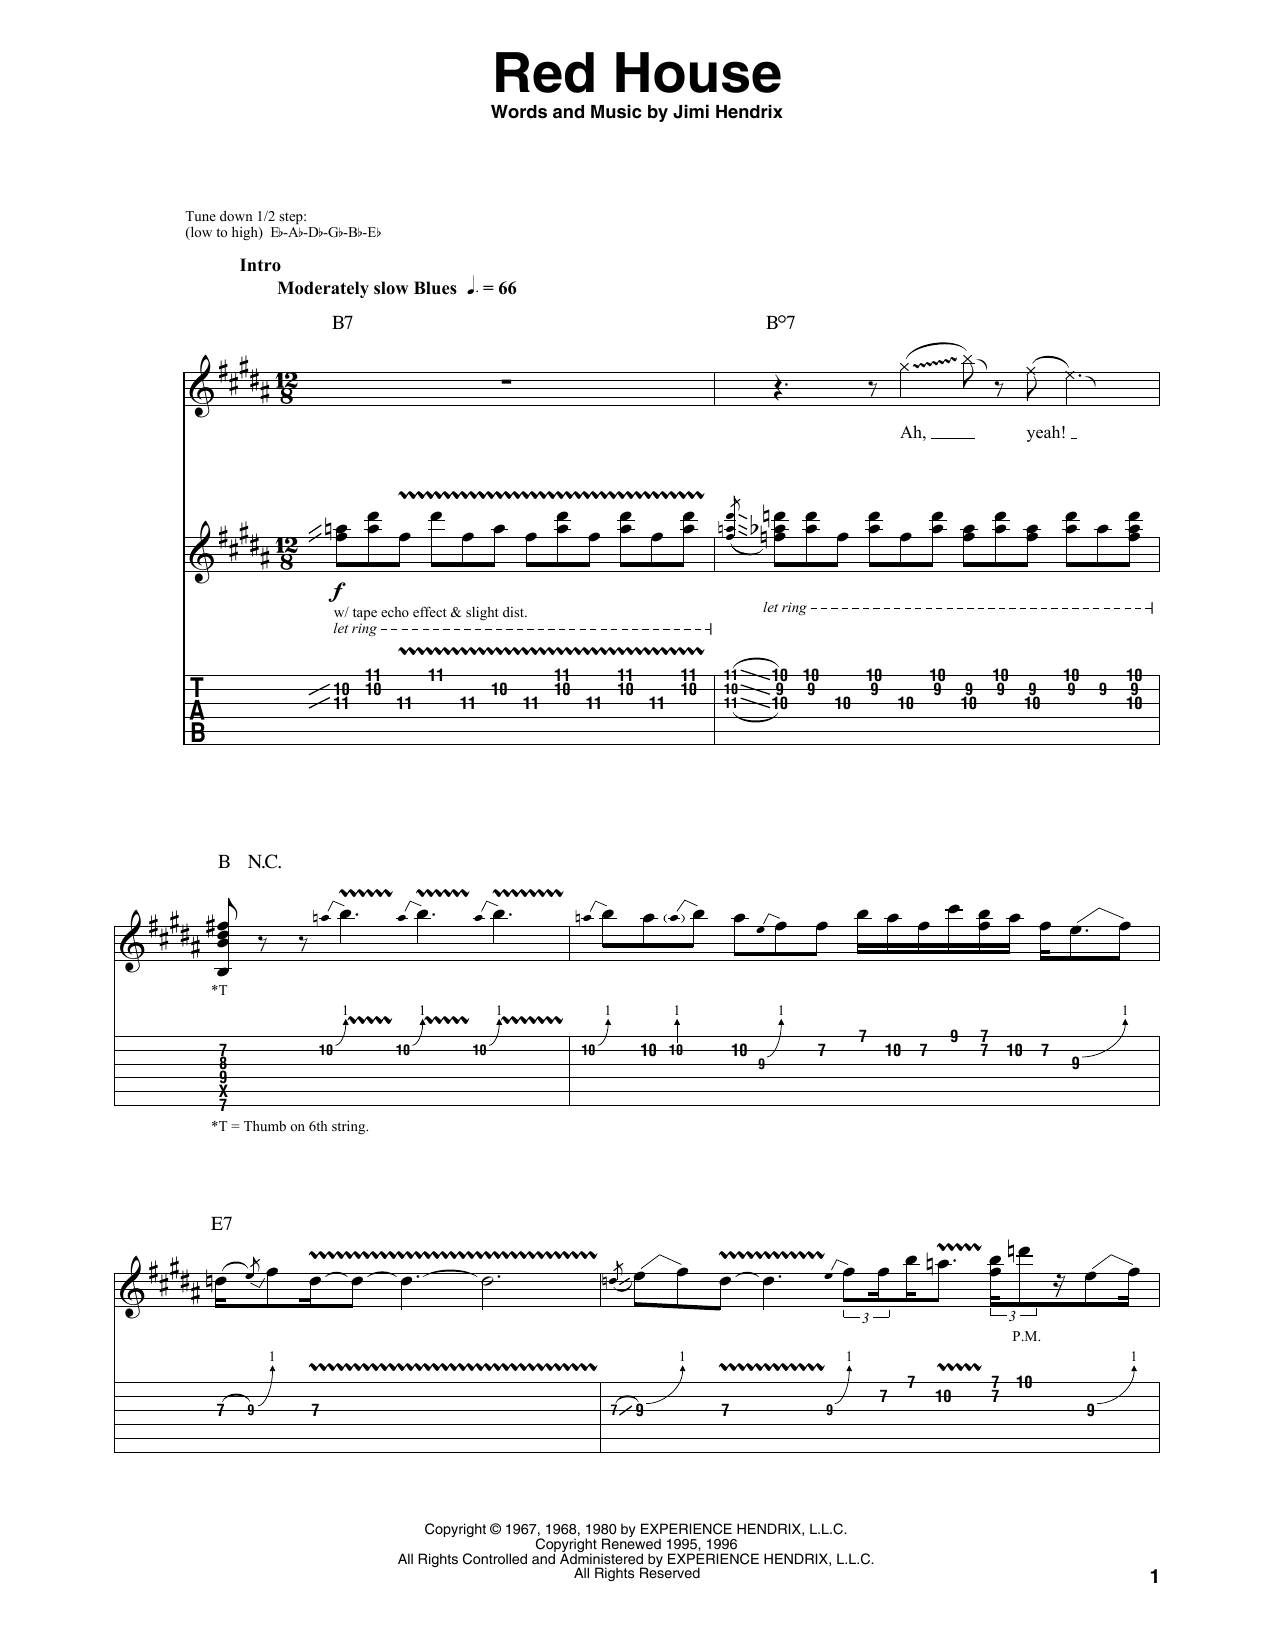 Download Jimi Hendrix Red House Sheet Music